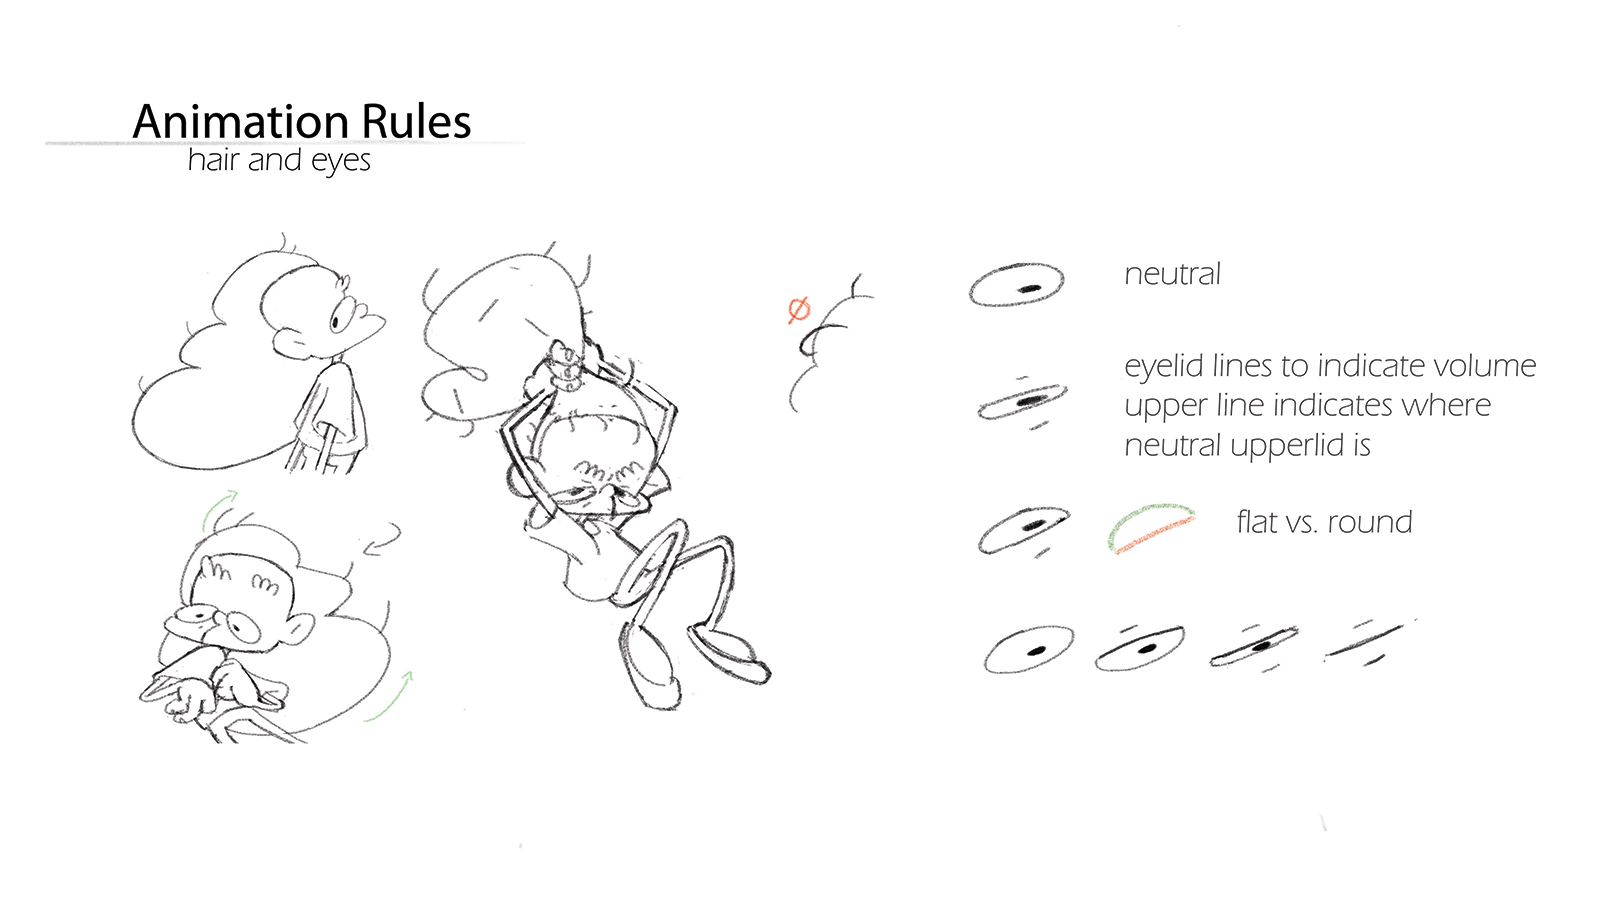 Animation rules for character's facial features in Flap.